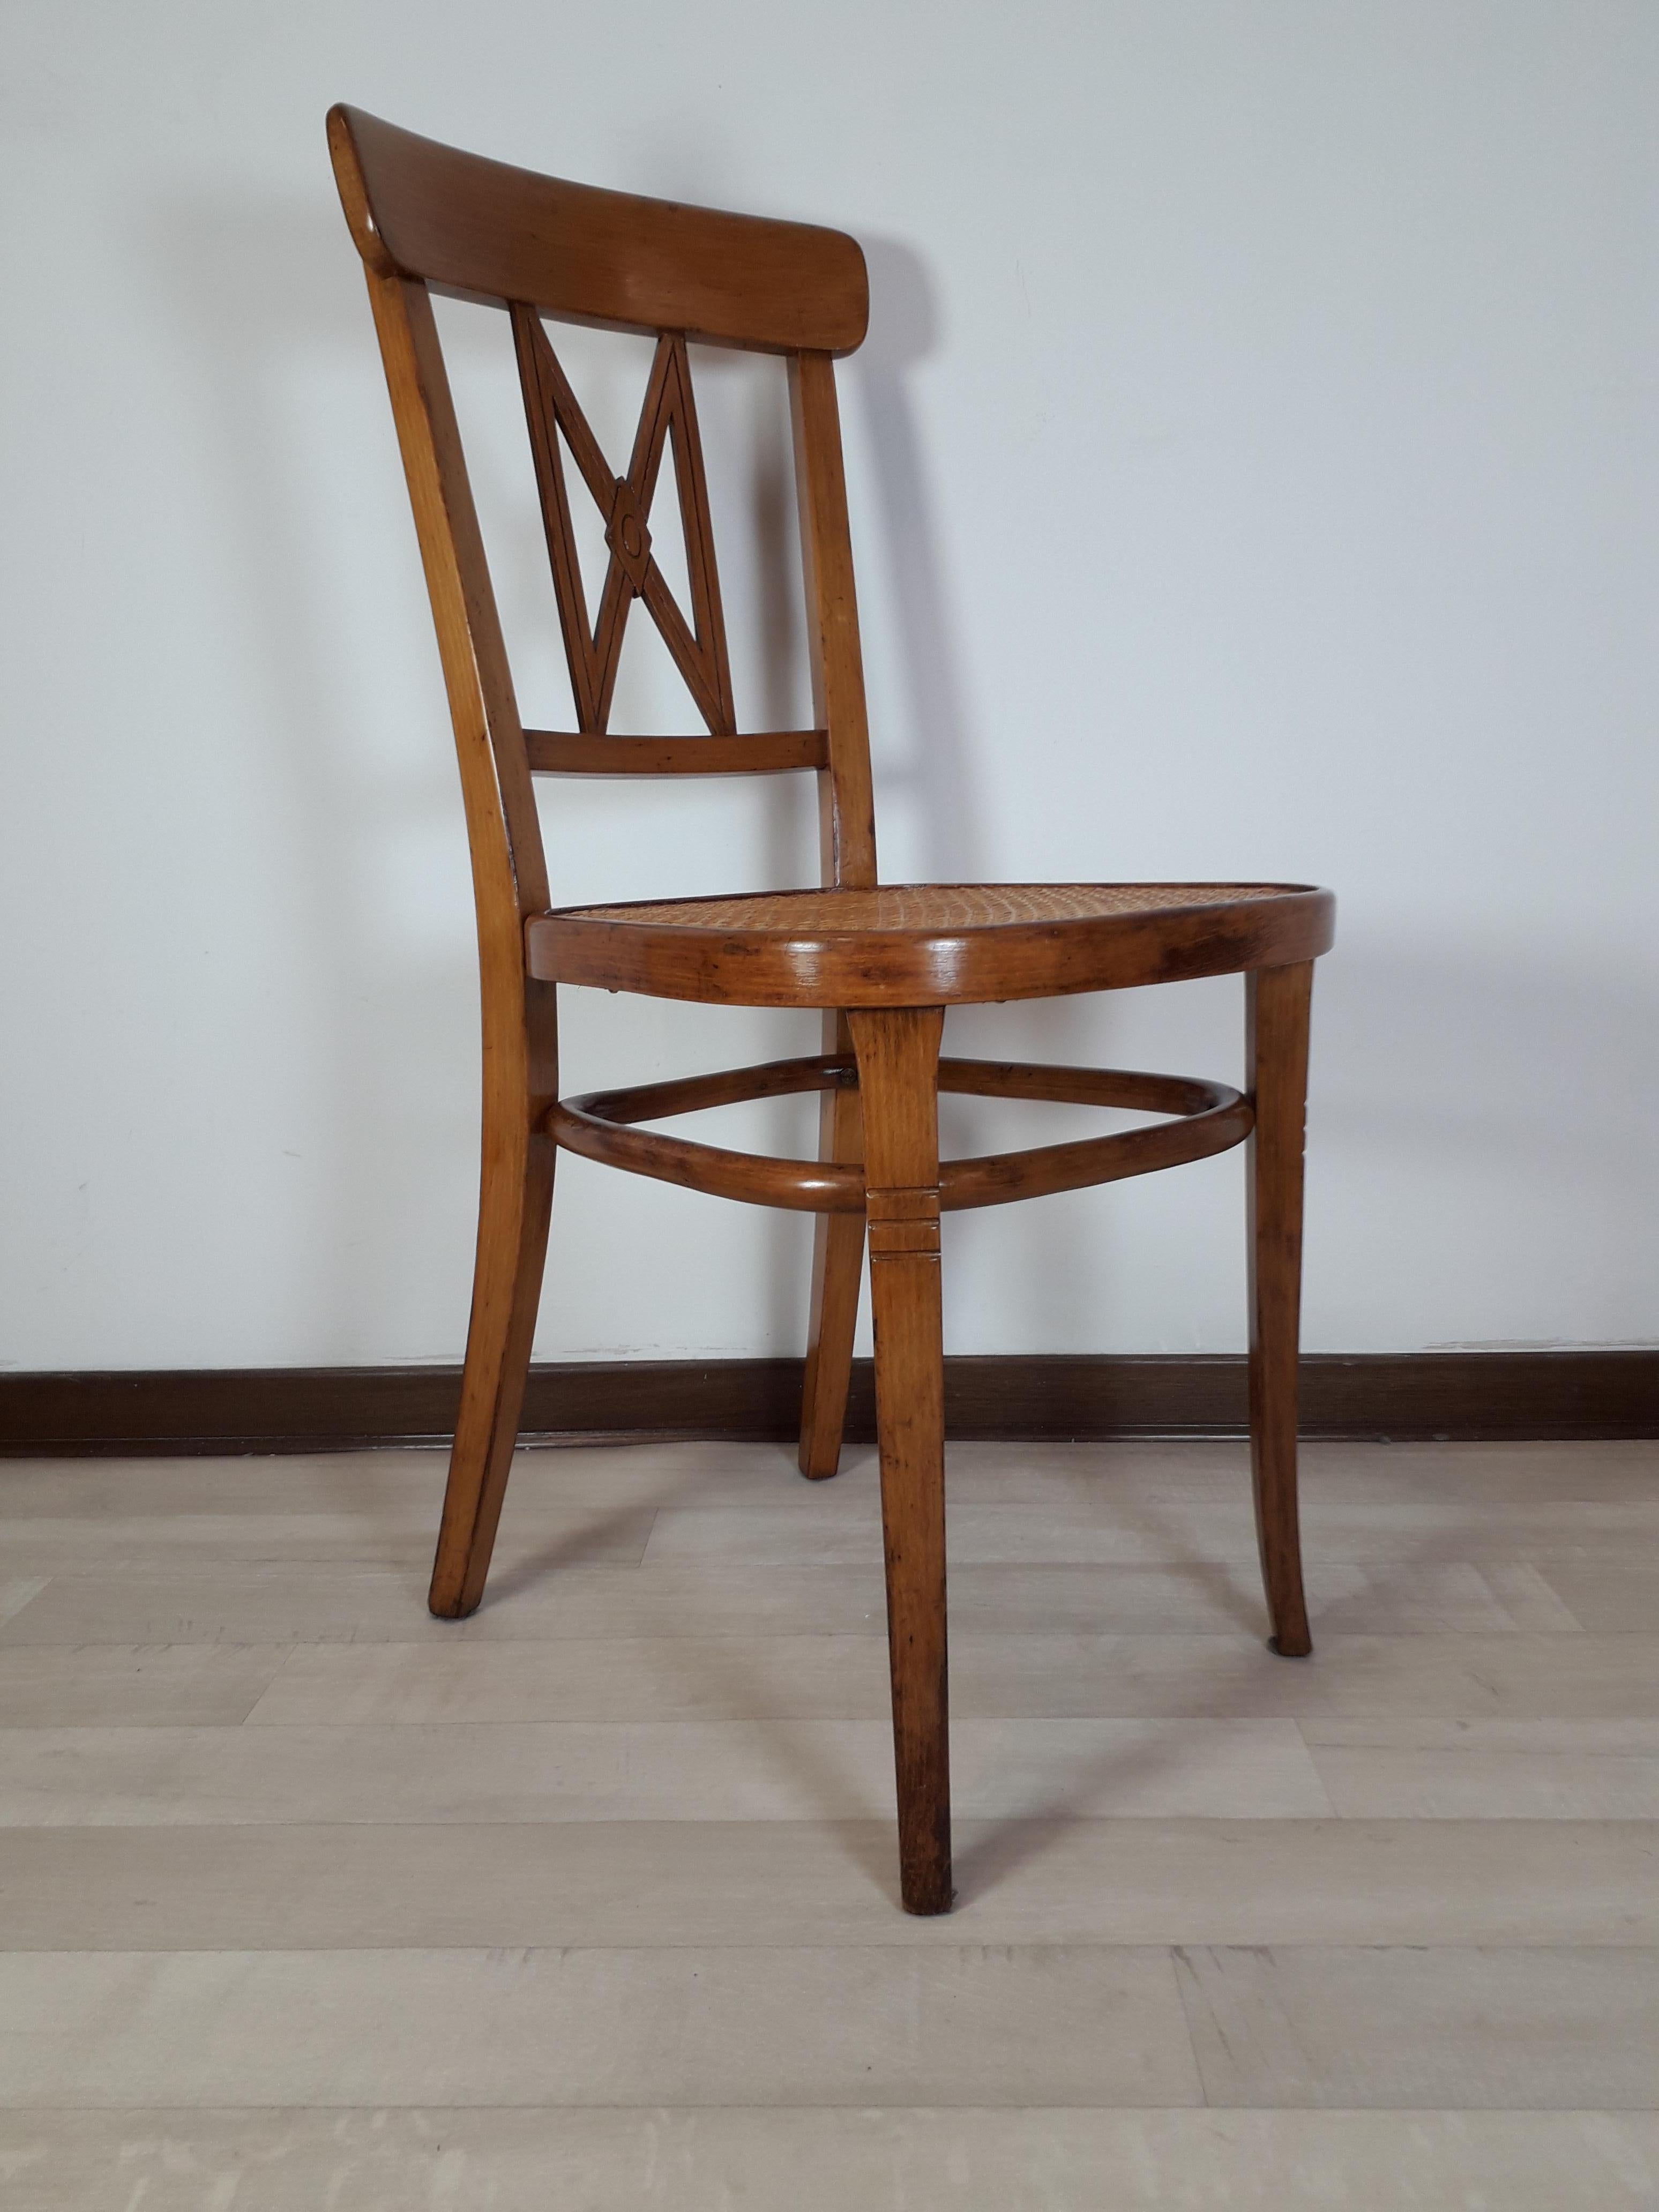 Nobiliary Dining Chair of Thonet from Wiener Werkstaette In Excellent Condition For Sale In Mariano Del Friuli, GO